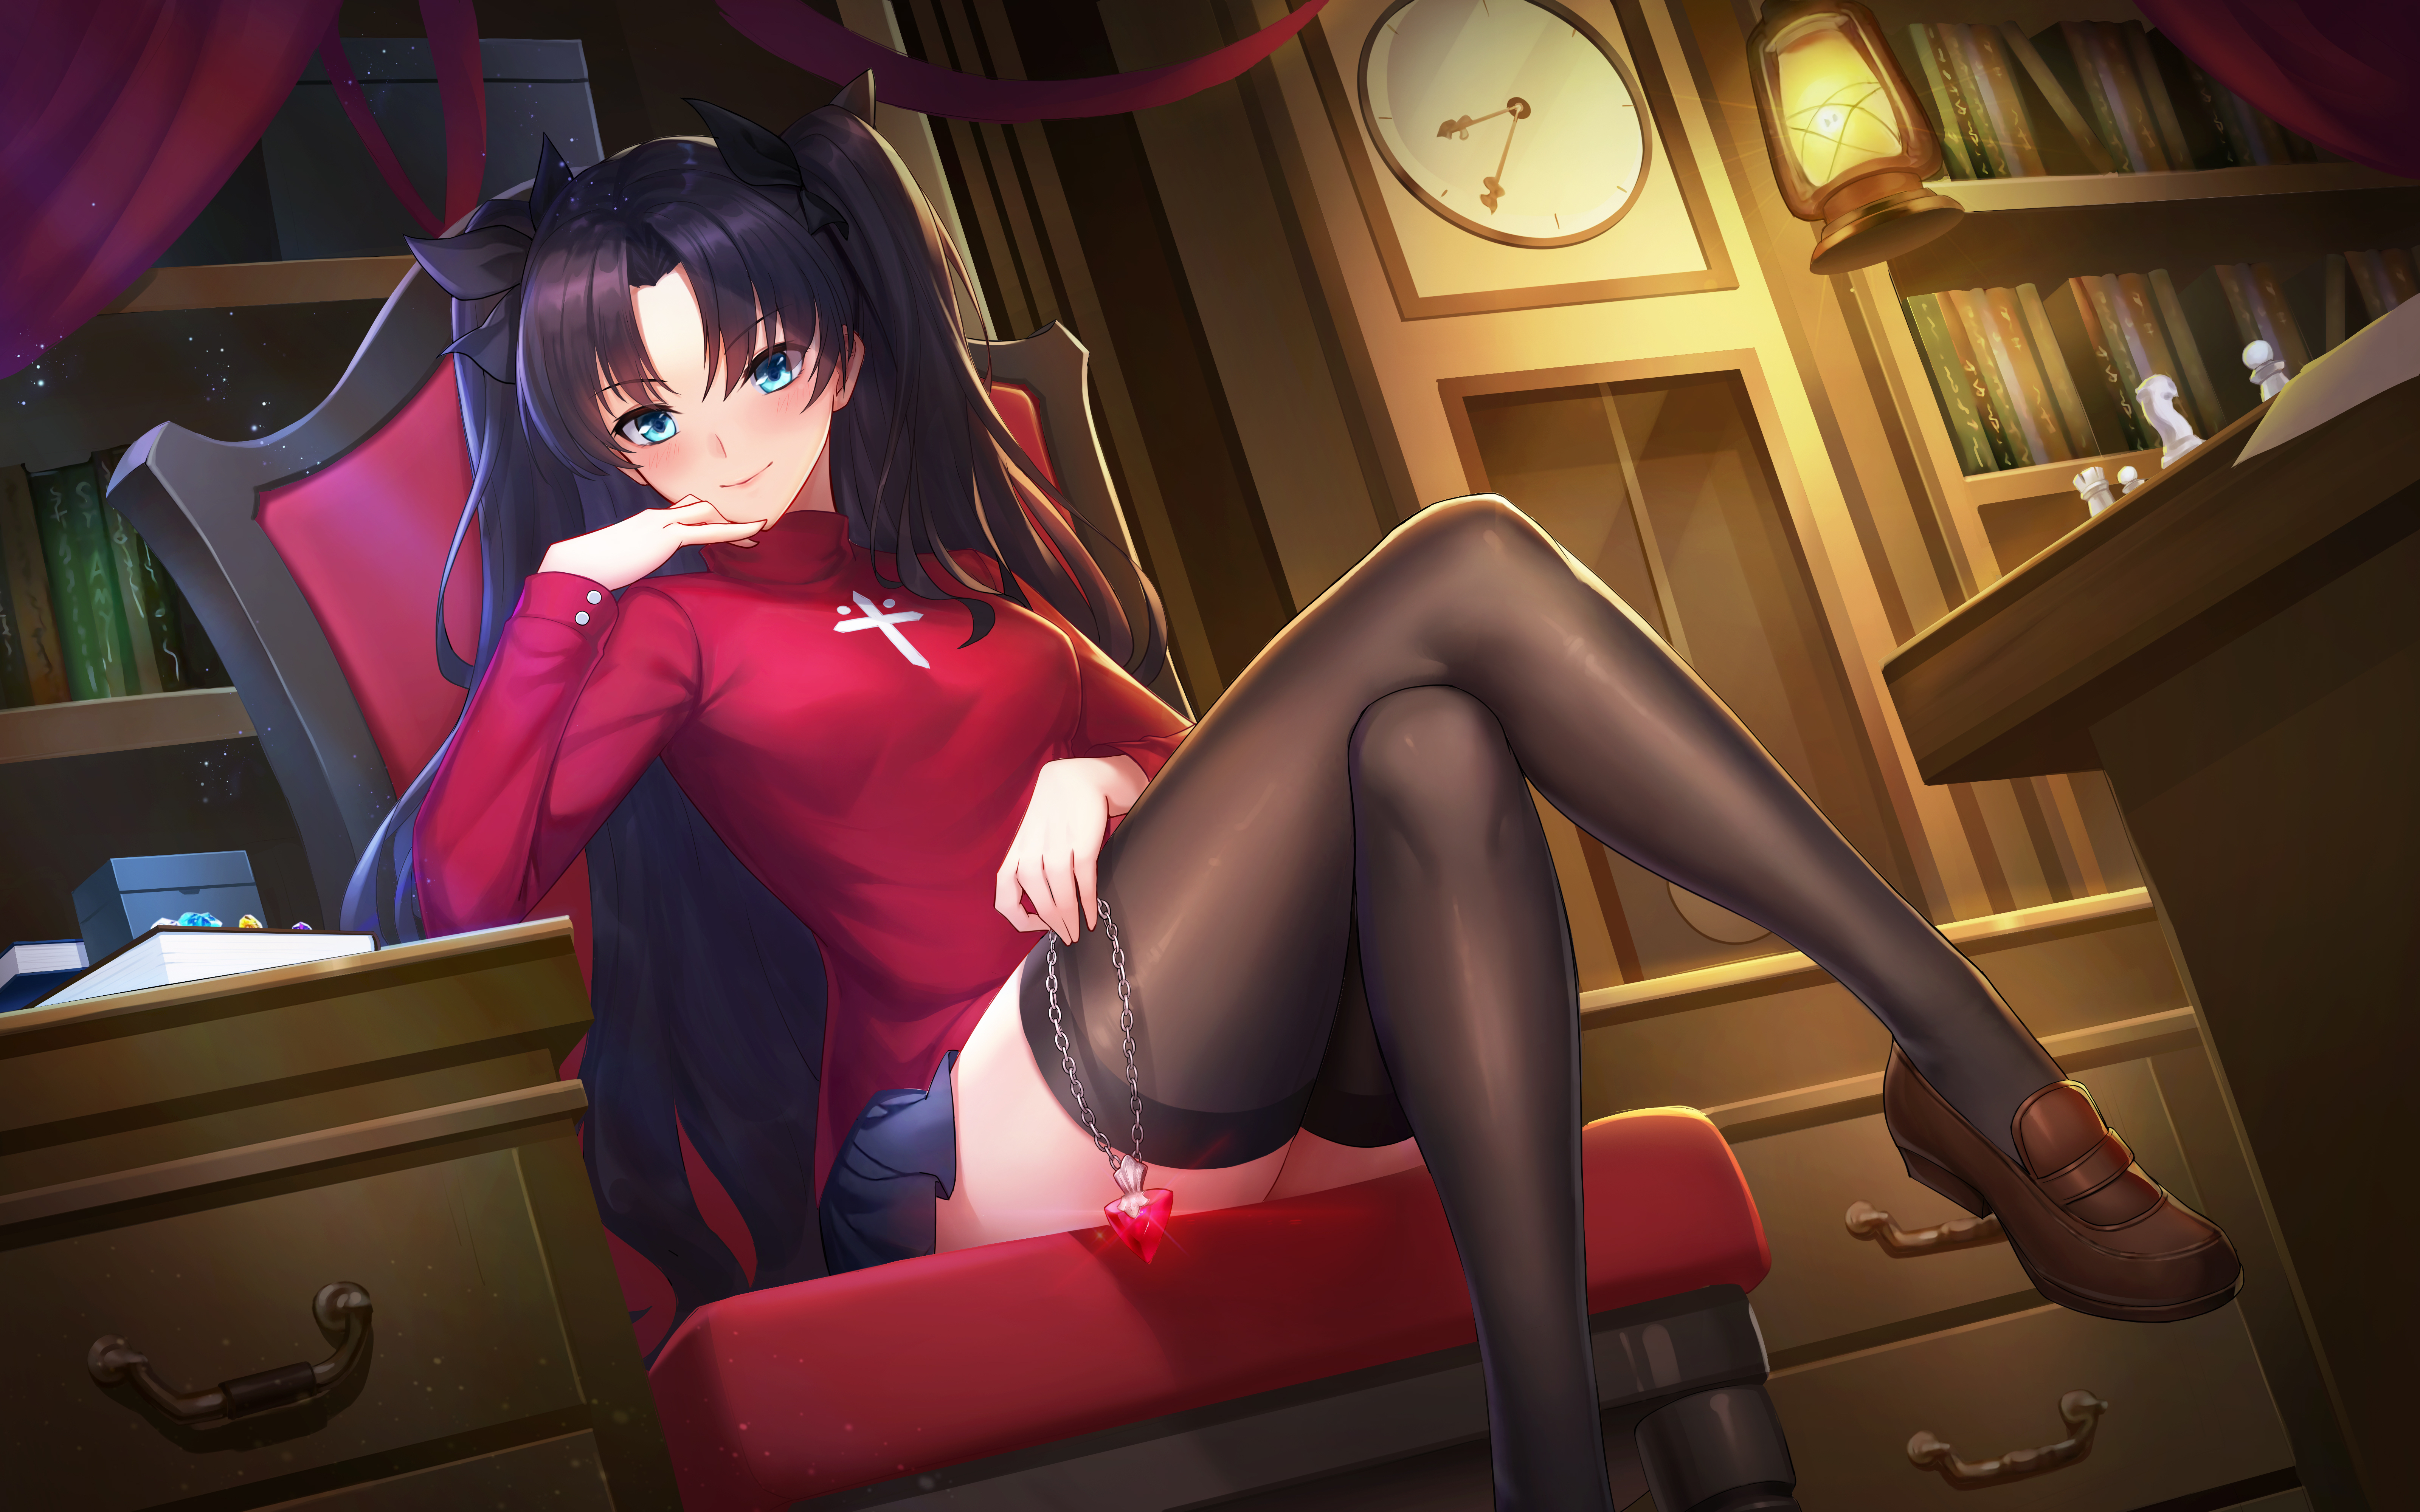 Anime 6400x4000 long hair Tohsaka Rin anime smiling red shirt clocks curtains jewel lamp miniskirt chair books chess drawer floating particles hand on face sitting looking at viewer shoes Fate series anime girls dark hair blue eyes thigh-highs low-angle Sramy Fate/Stay Night